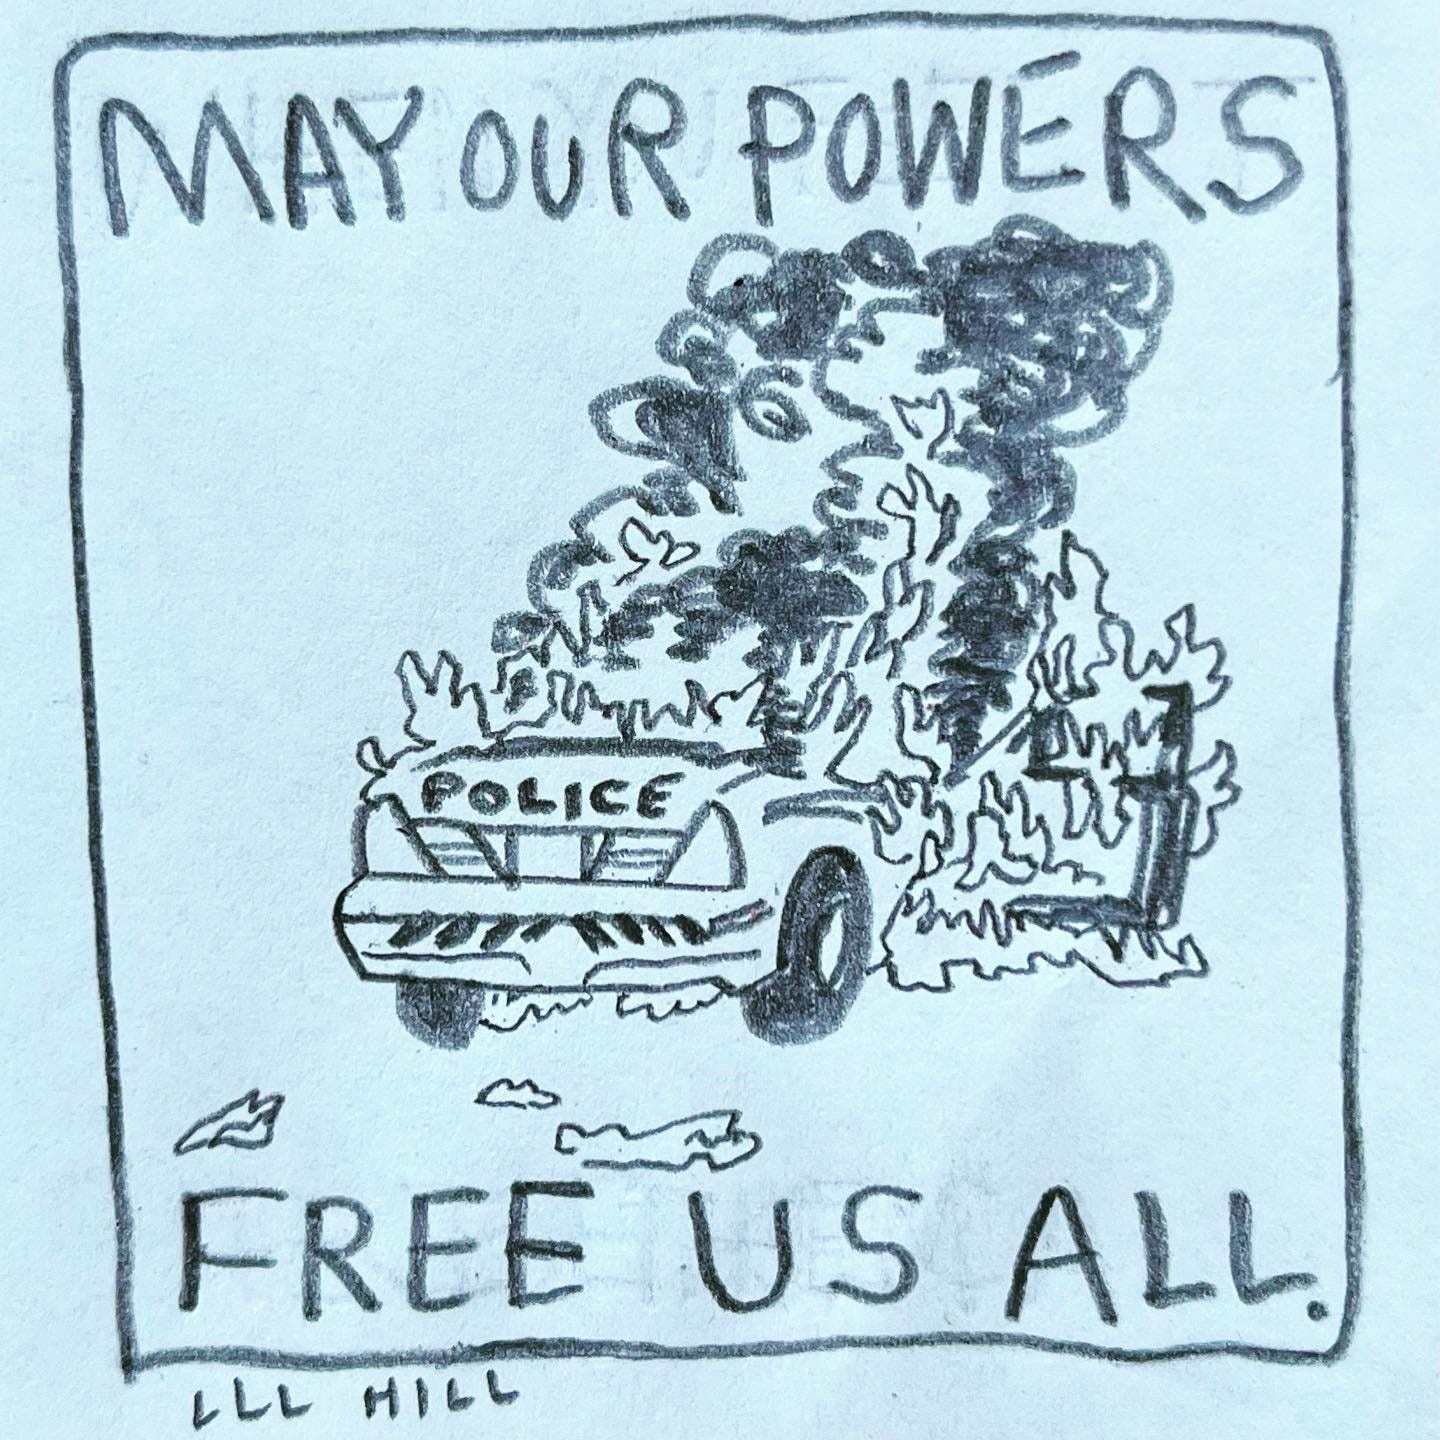 Panel 6: may our powers free us all. Image: a police car, with the side door open, engulfed in flames